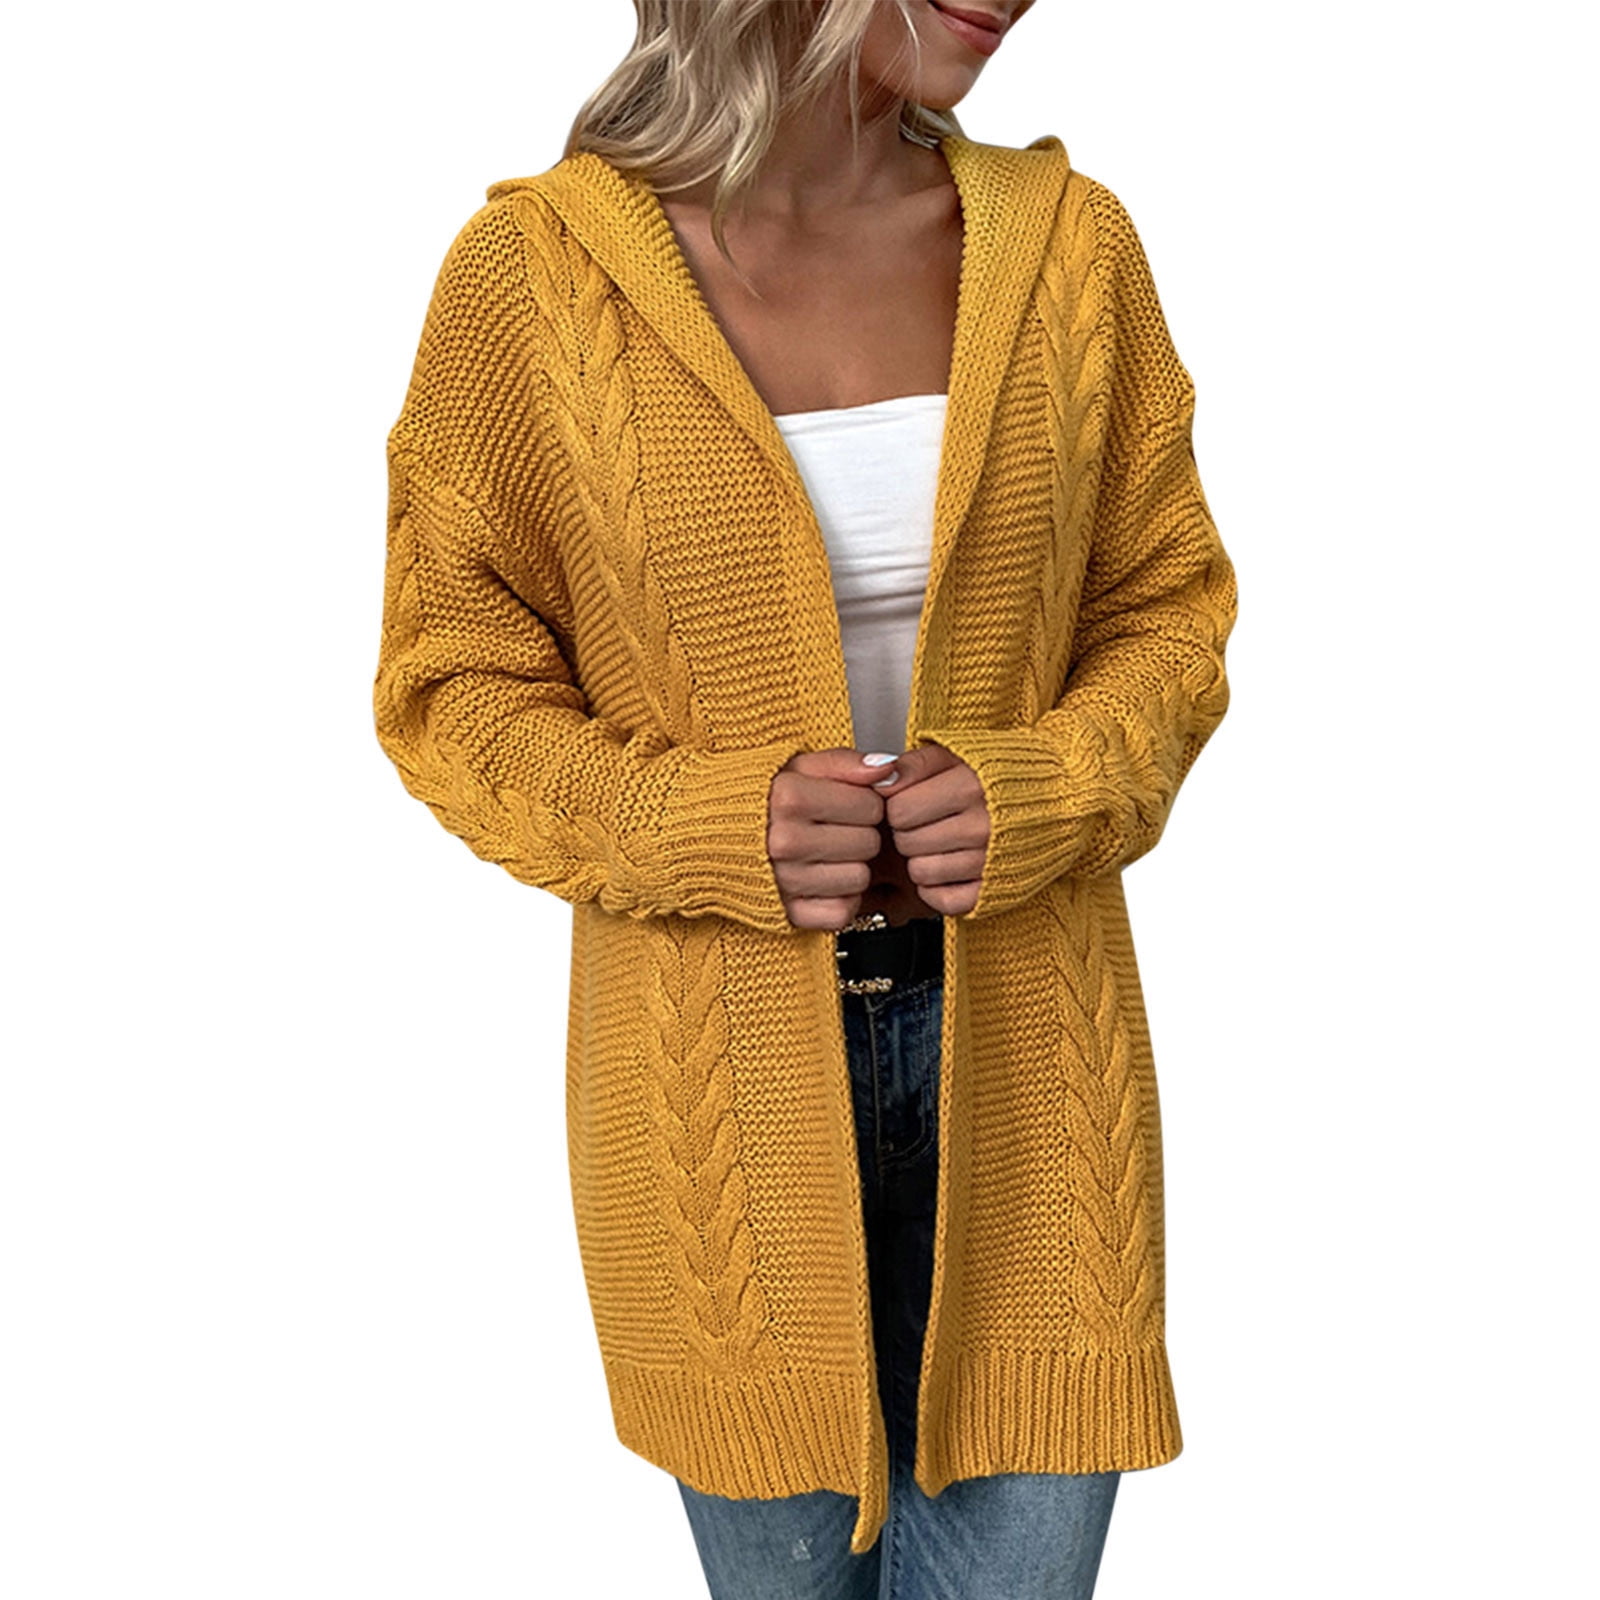 adviicd Women Casual Fashion Thick Solid Color Knit Hooded Cardigan Sleeve  Sweater Jacket 70s Jacket Women 